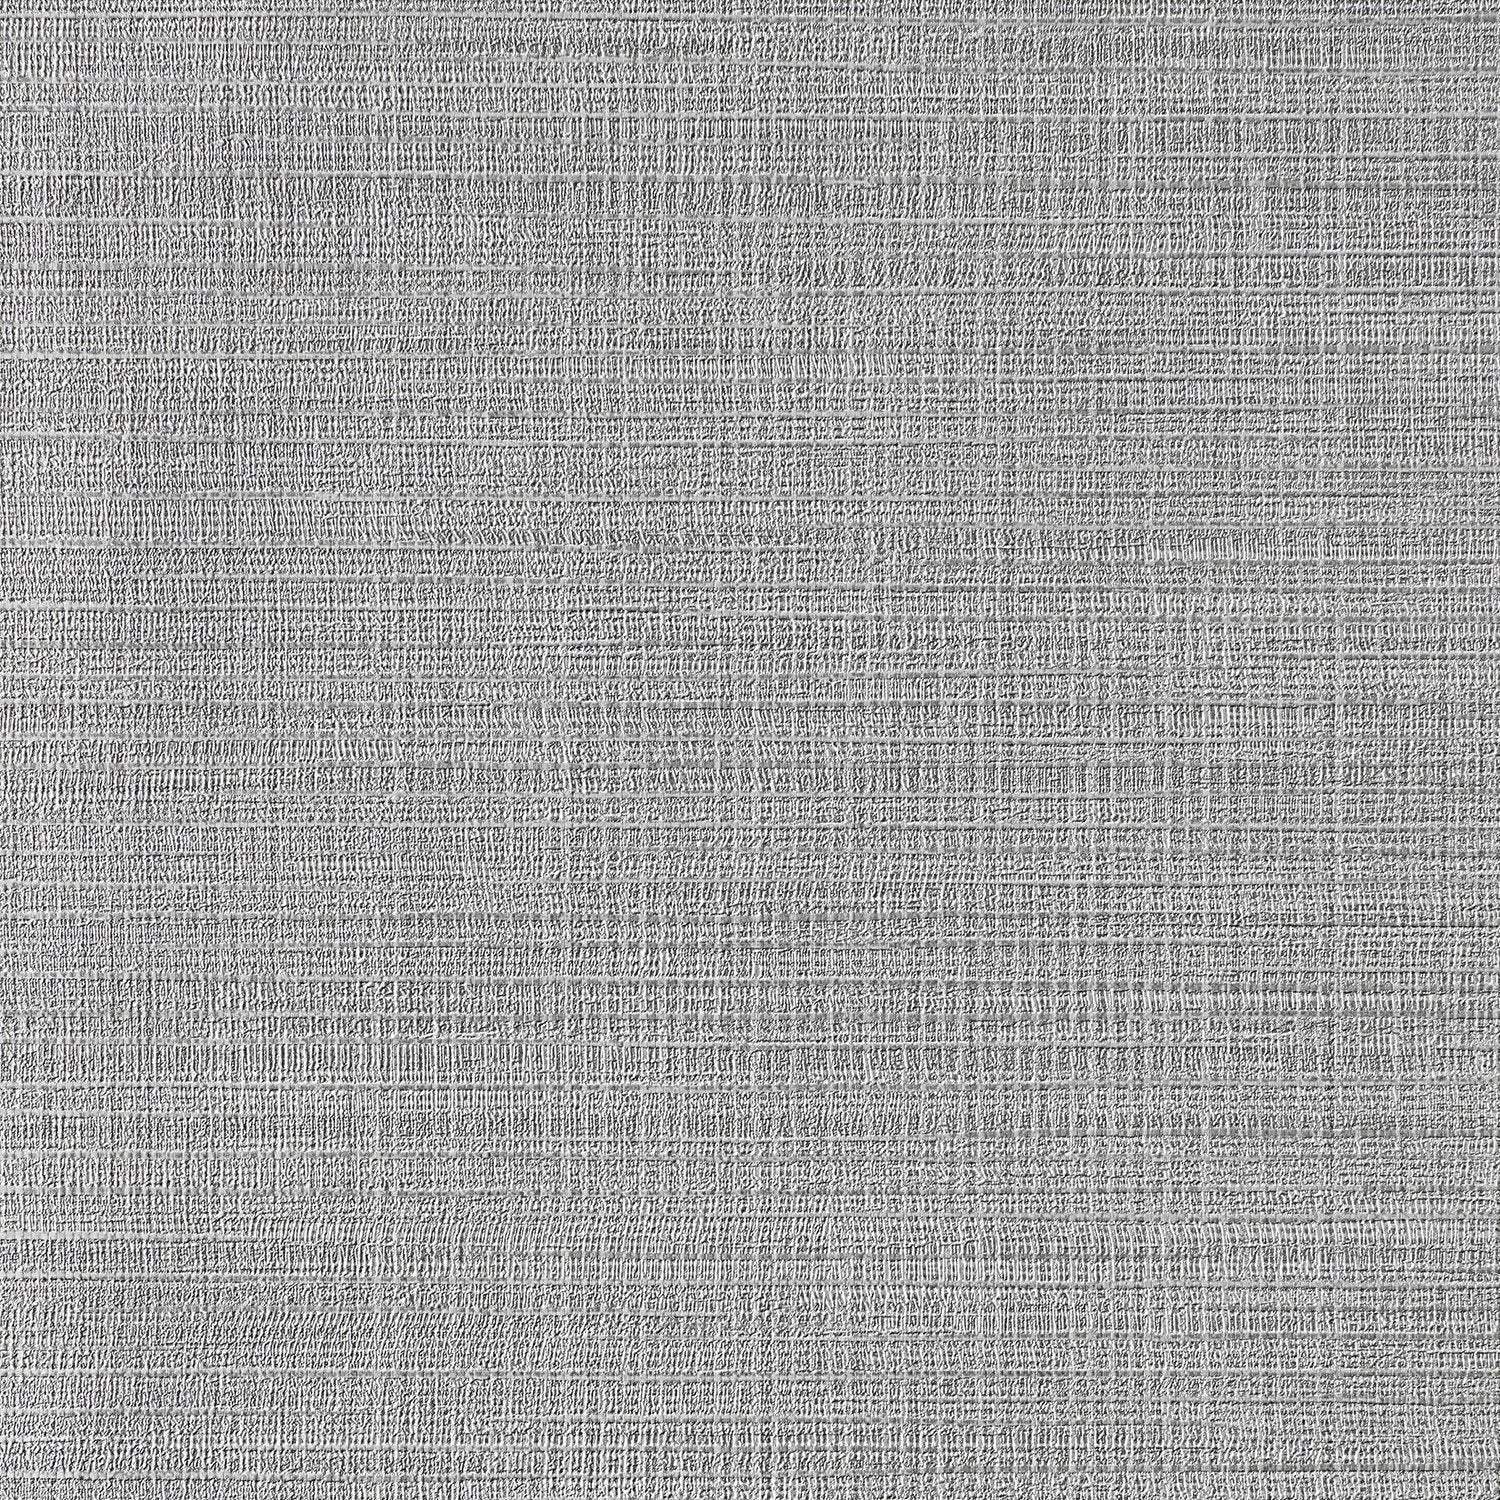 Fresh Mesh - Y47930 - Wallcovering - Vycon - Kube Contract